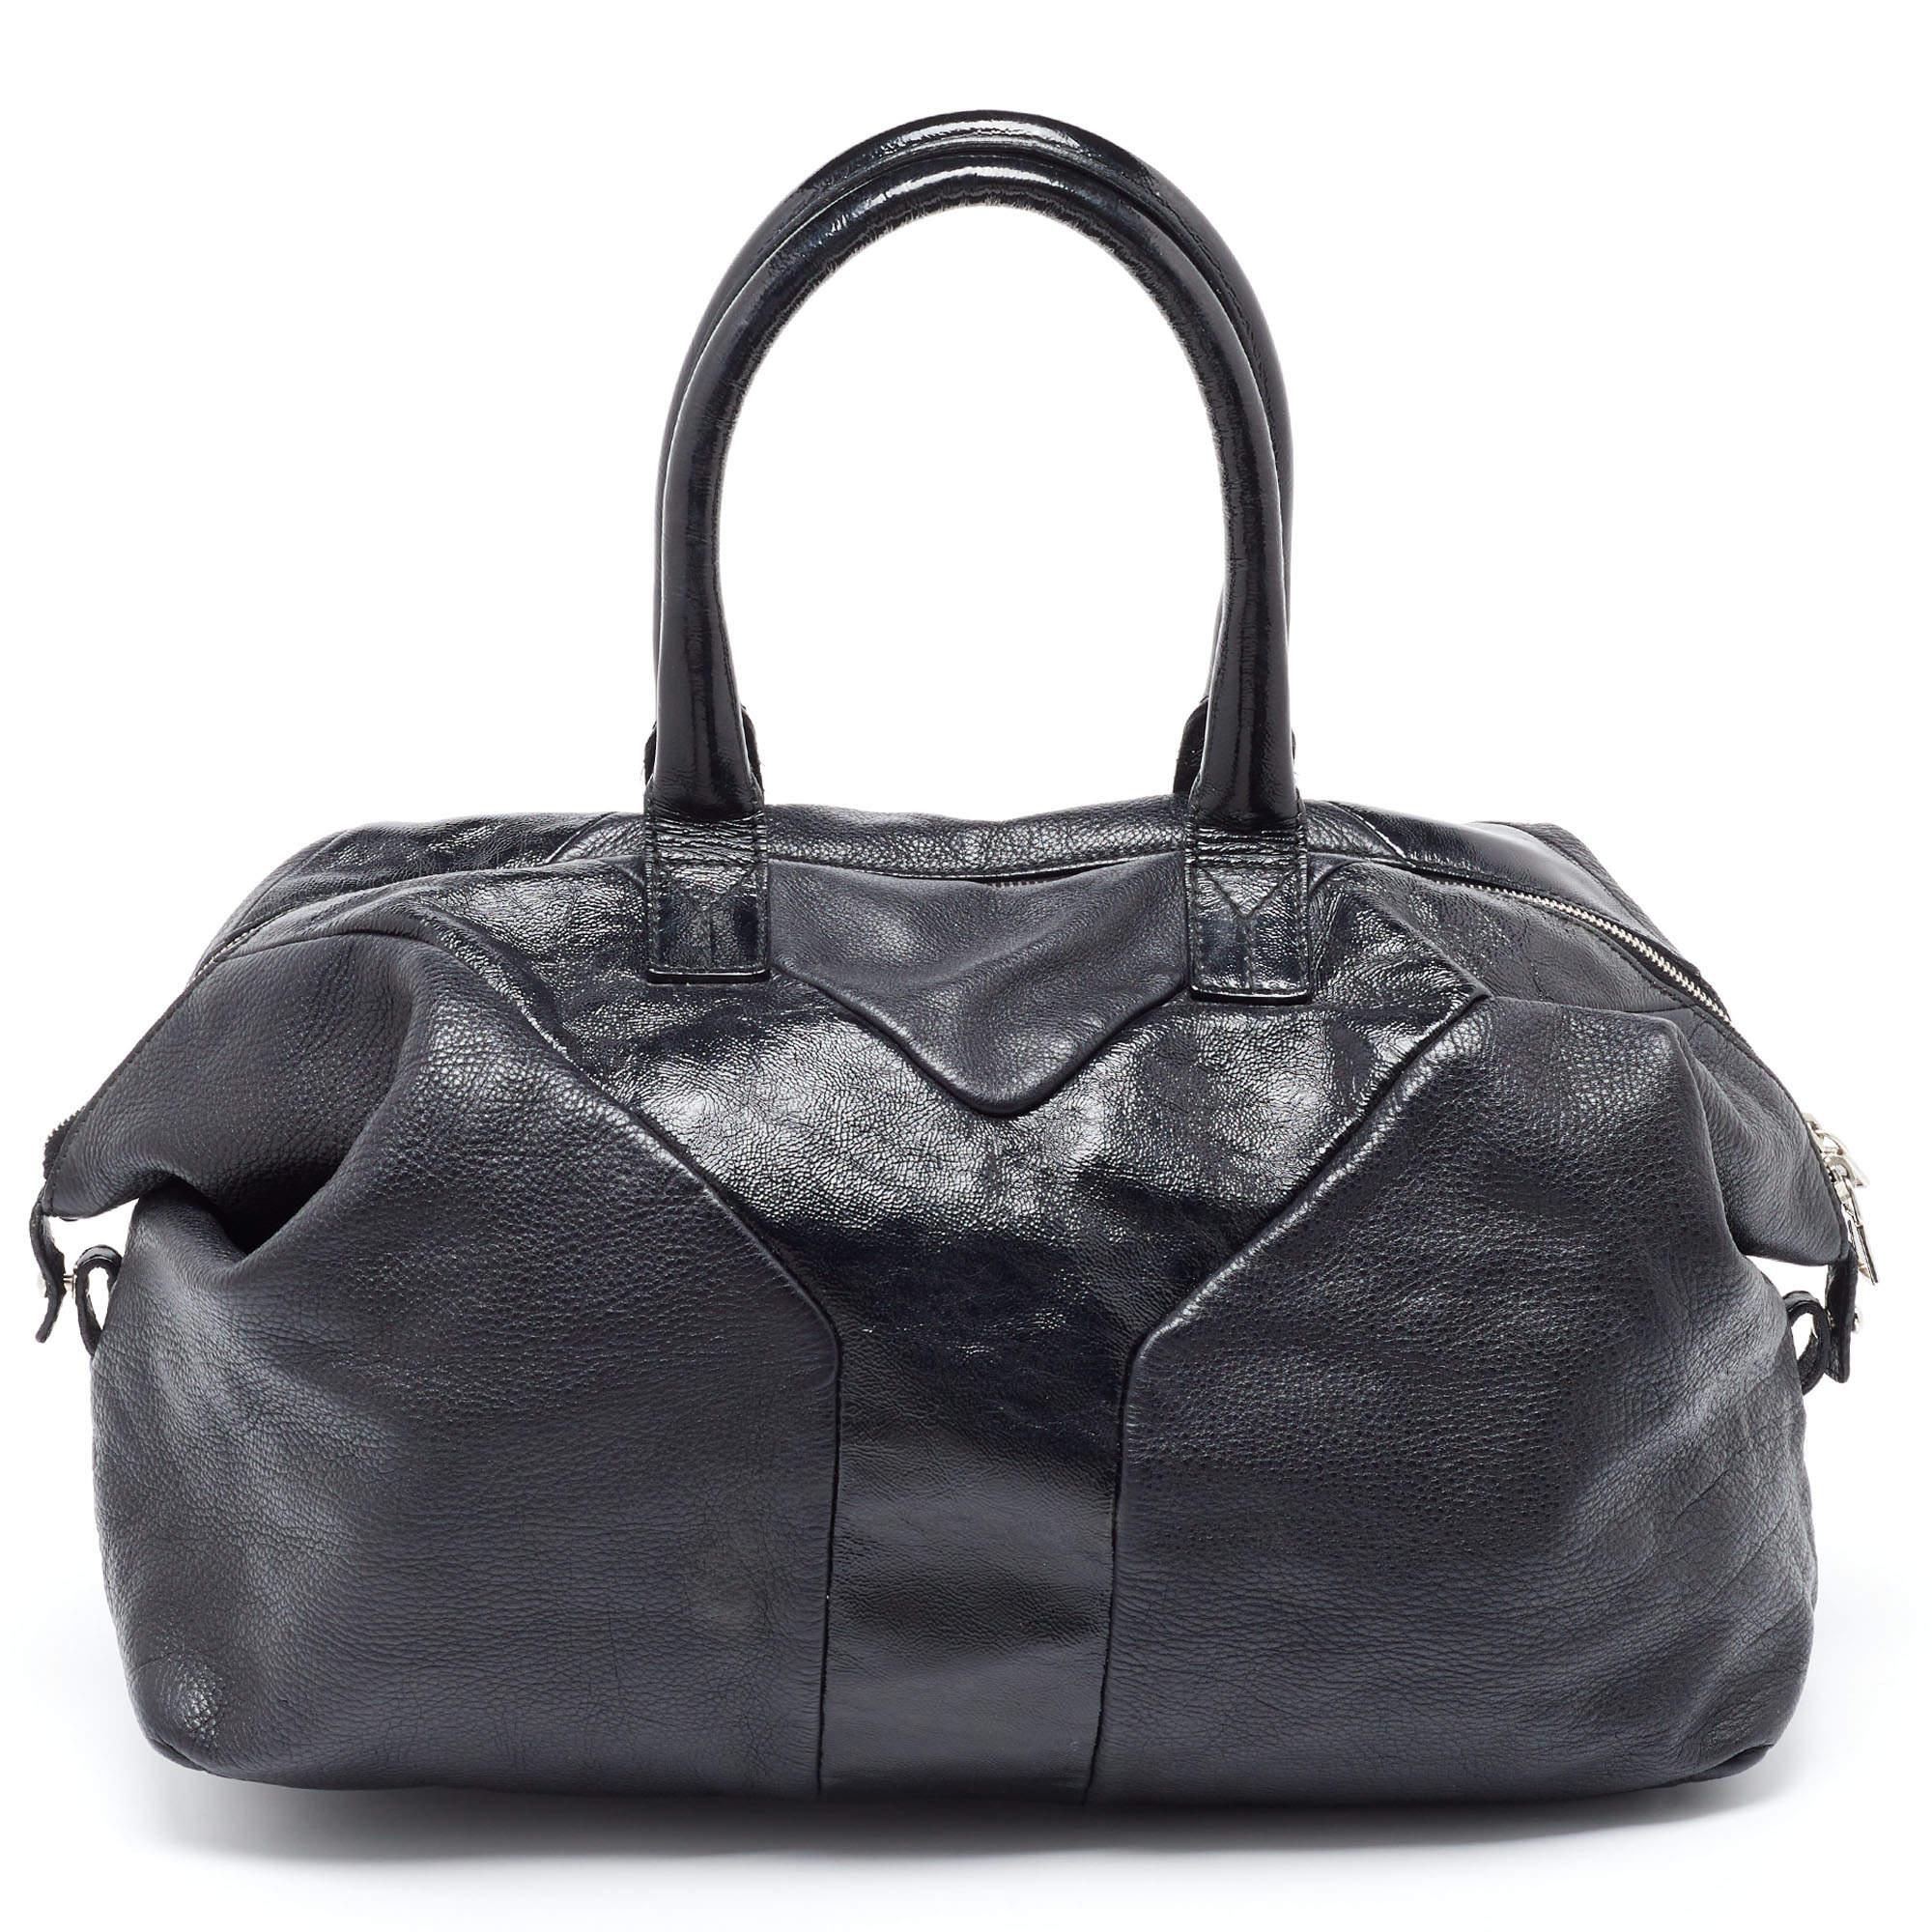 Carry this gorgeous Saint Laurent creation wherever you go for convenience and style. Meticulously crafted from leather, this Easy Y has been styled with a large Y on the exterior and equipped with two top handles, and a spacious fabric interior to